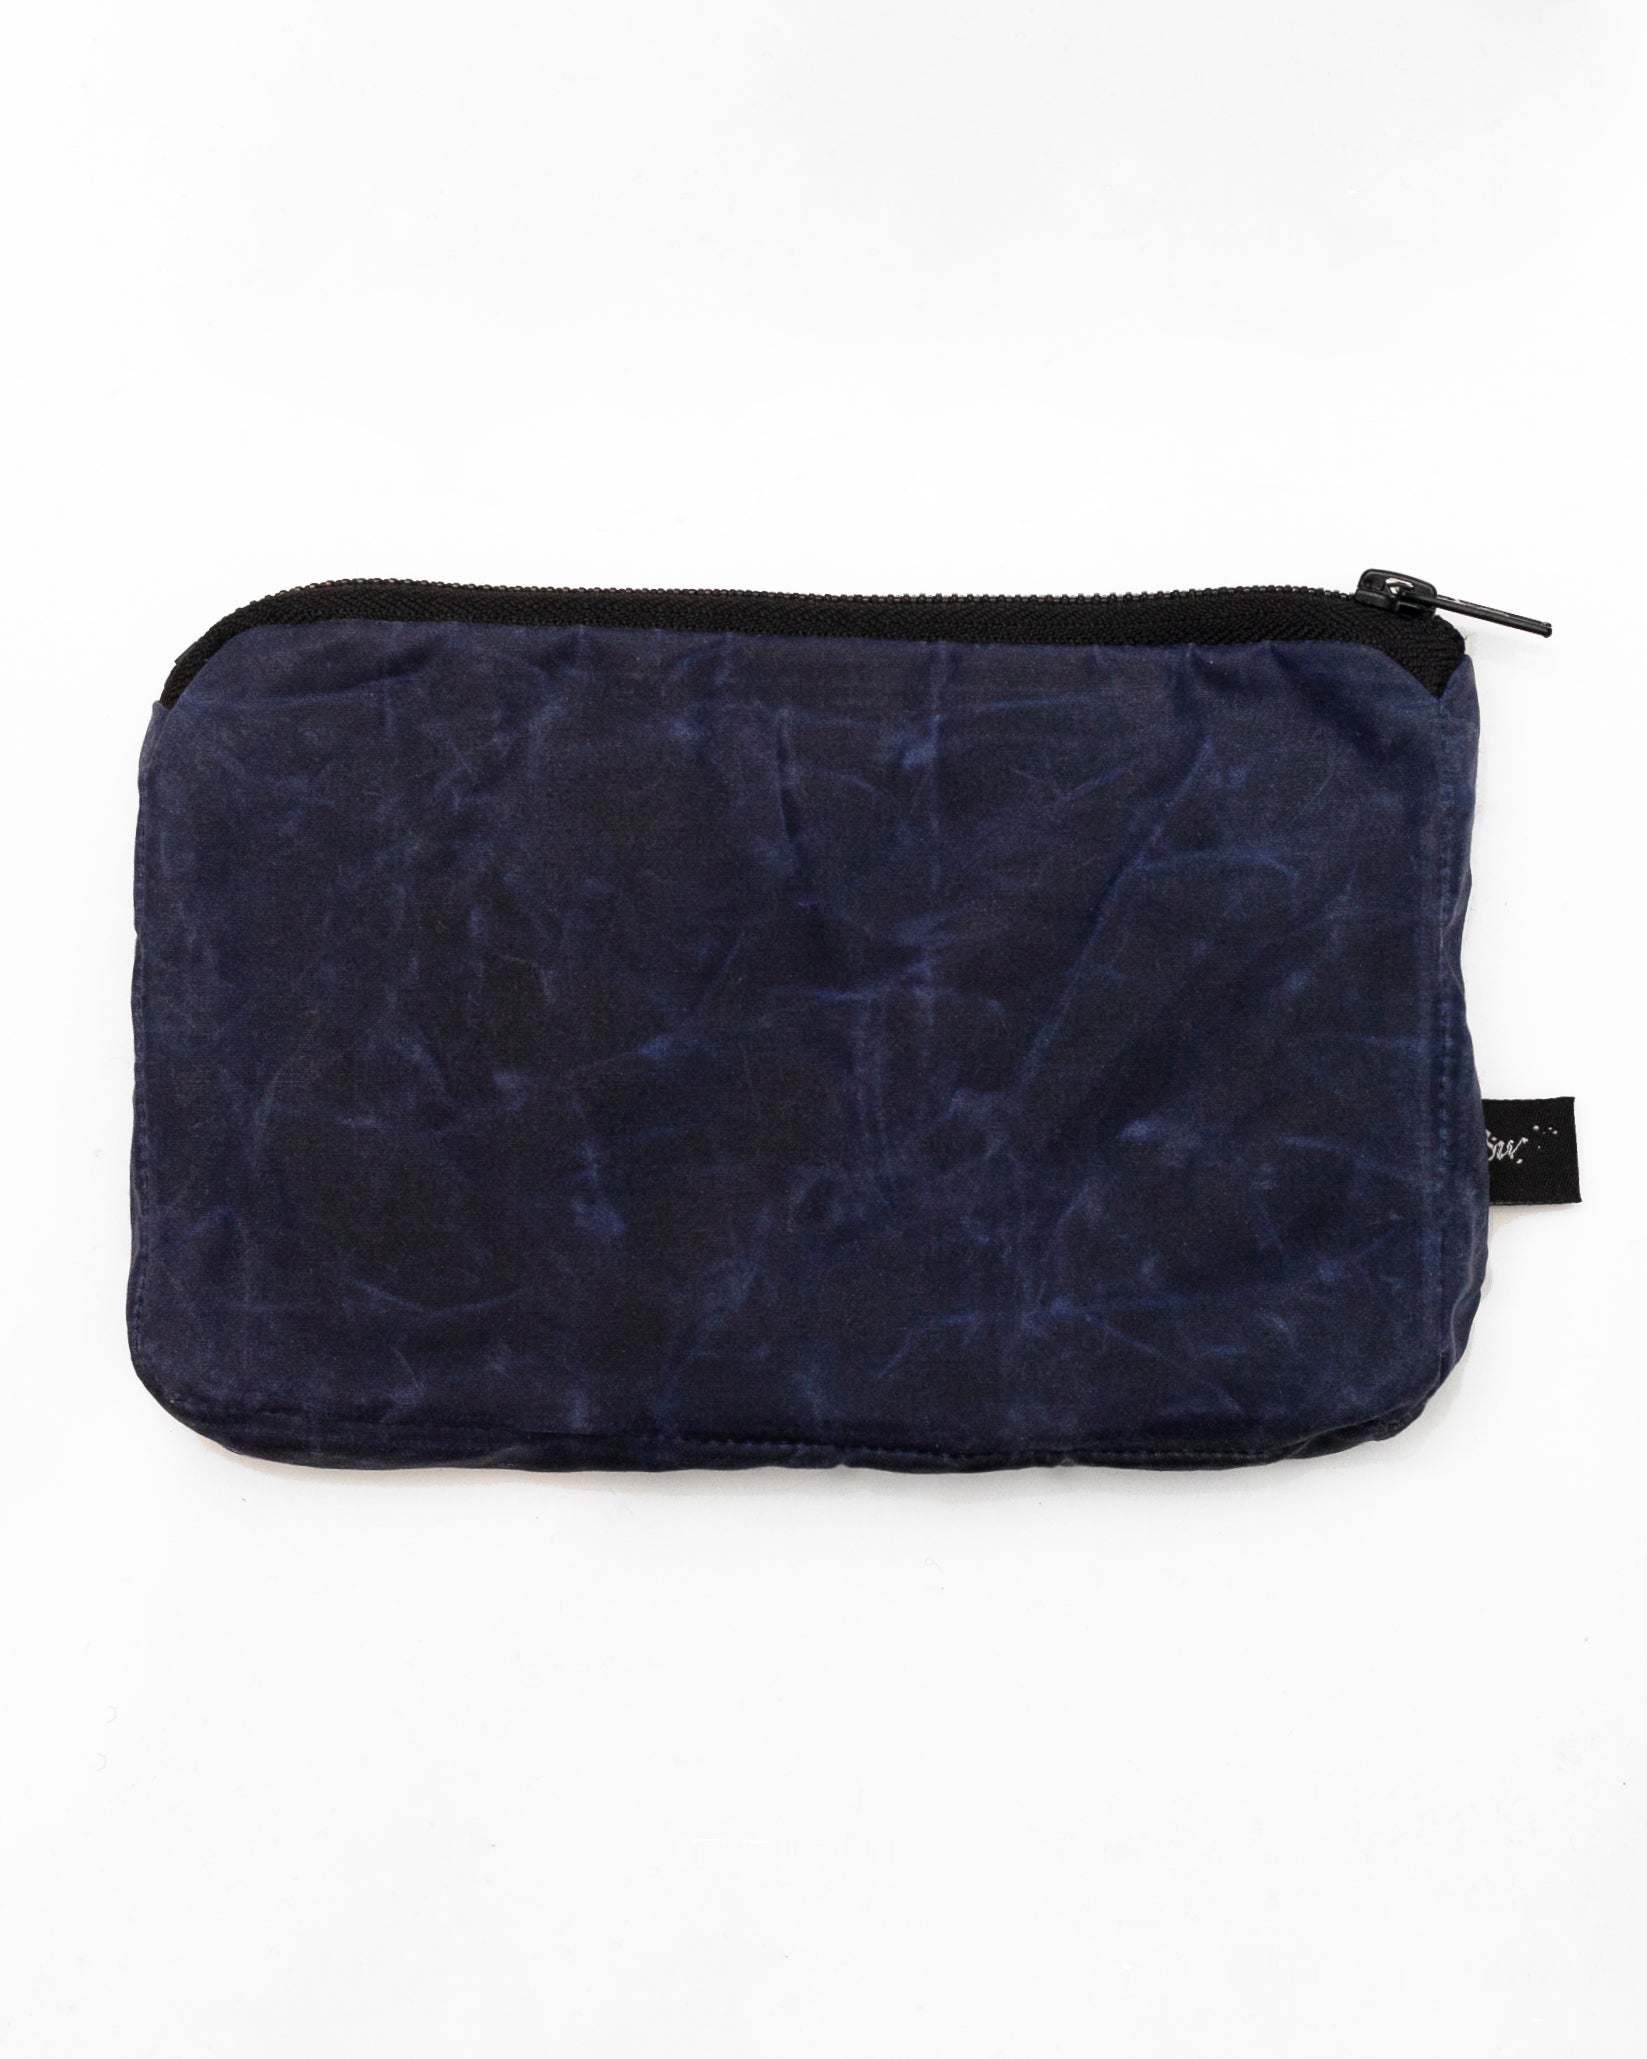 Pouch | Balsam Check/Navy Waxed Cotton